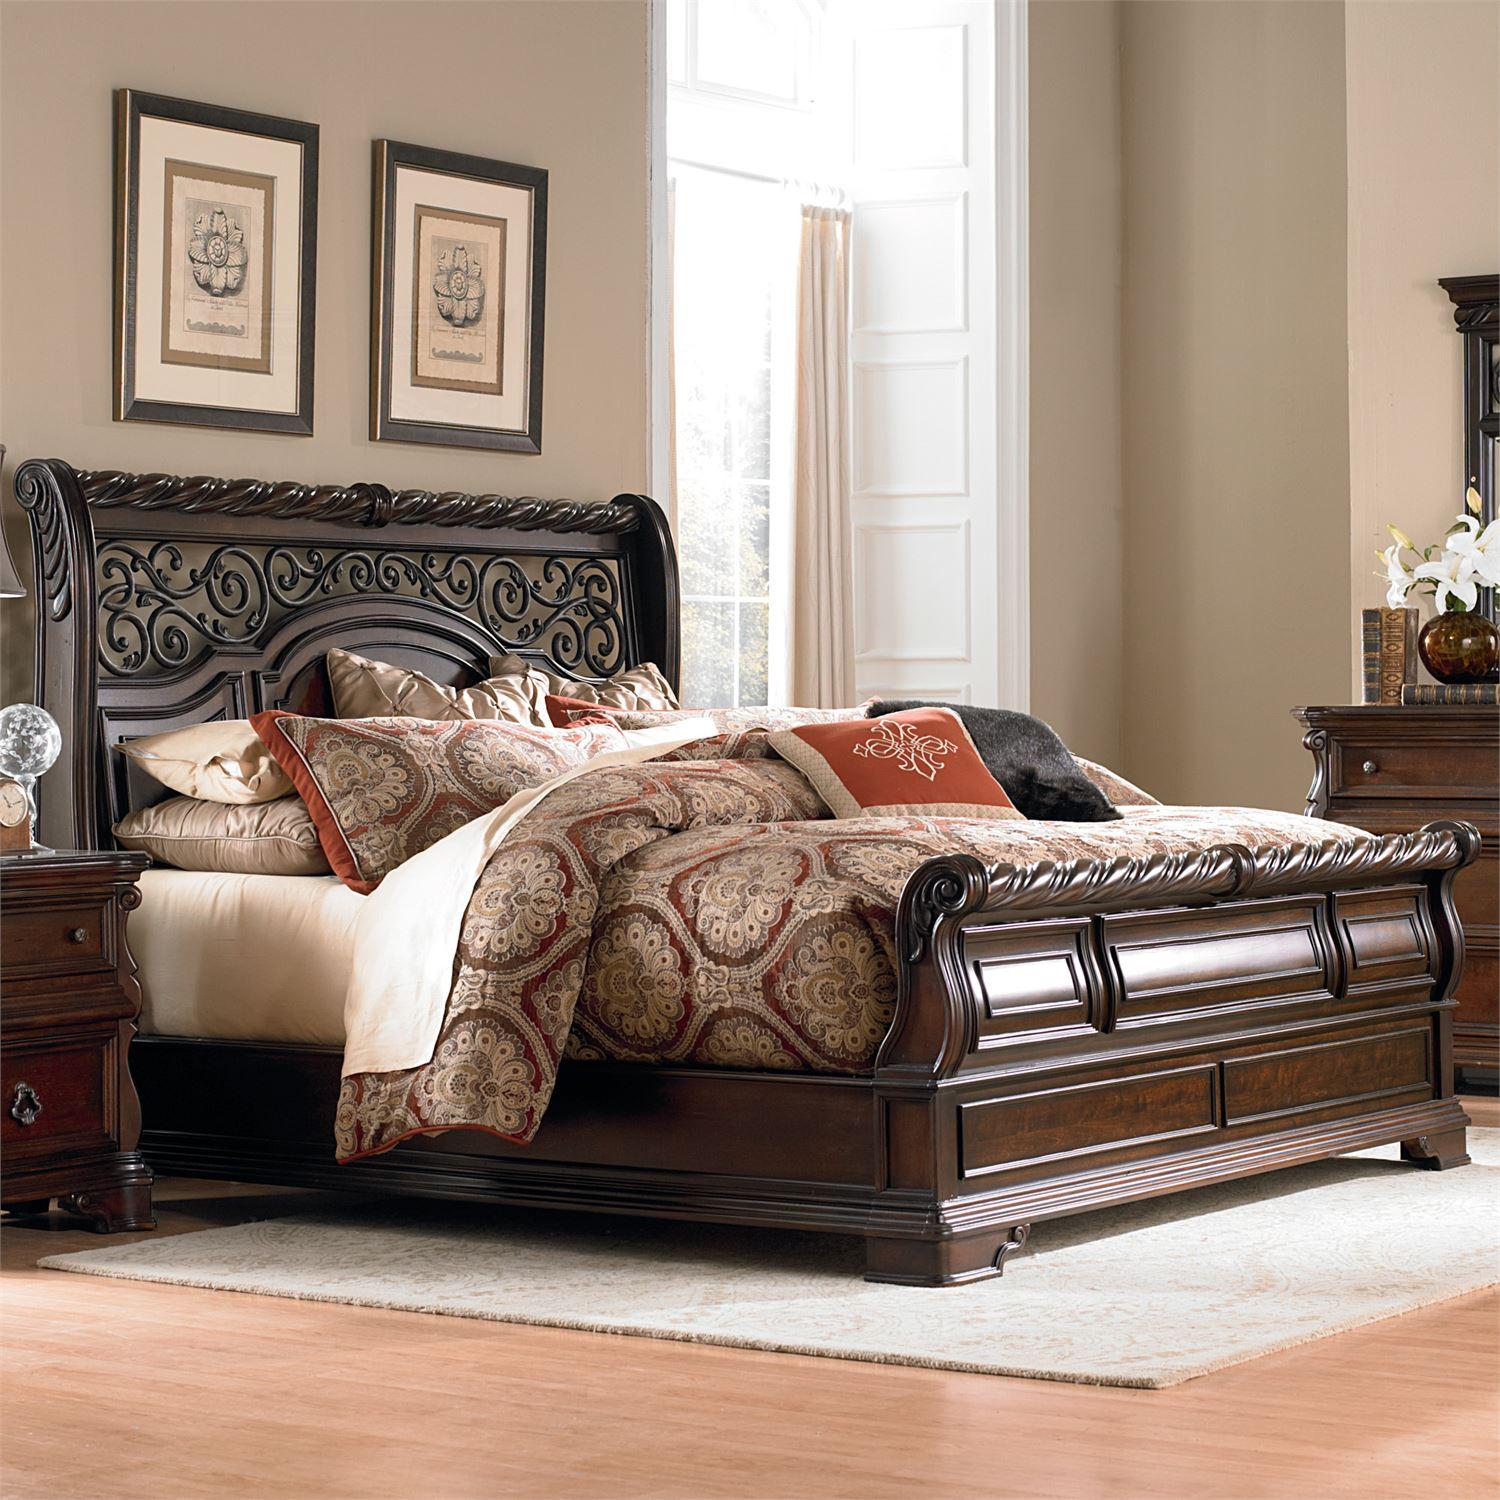 European Traditional Sleigh Bed Arbor Place 575-BR-KCS 575-BR-KCS in Brown 